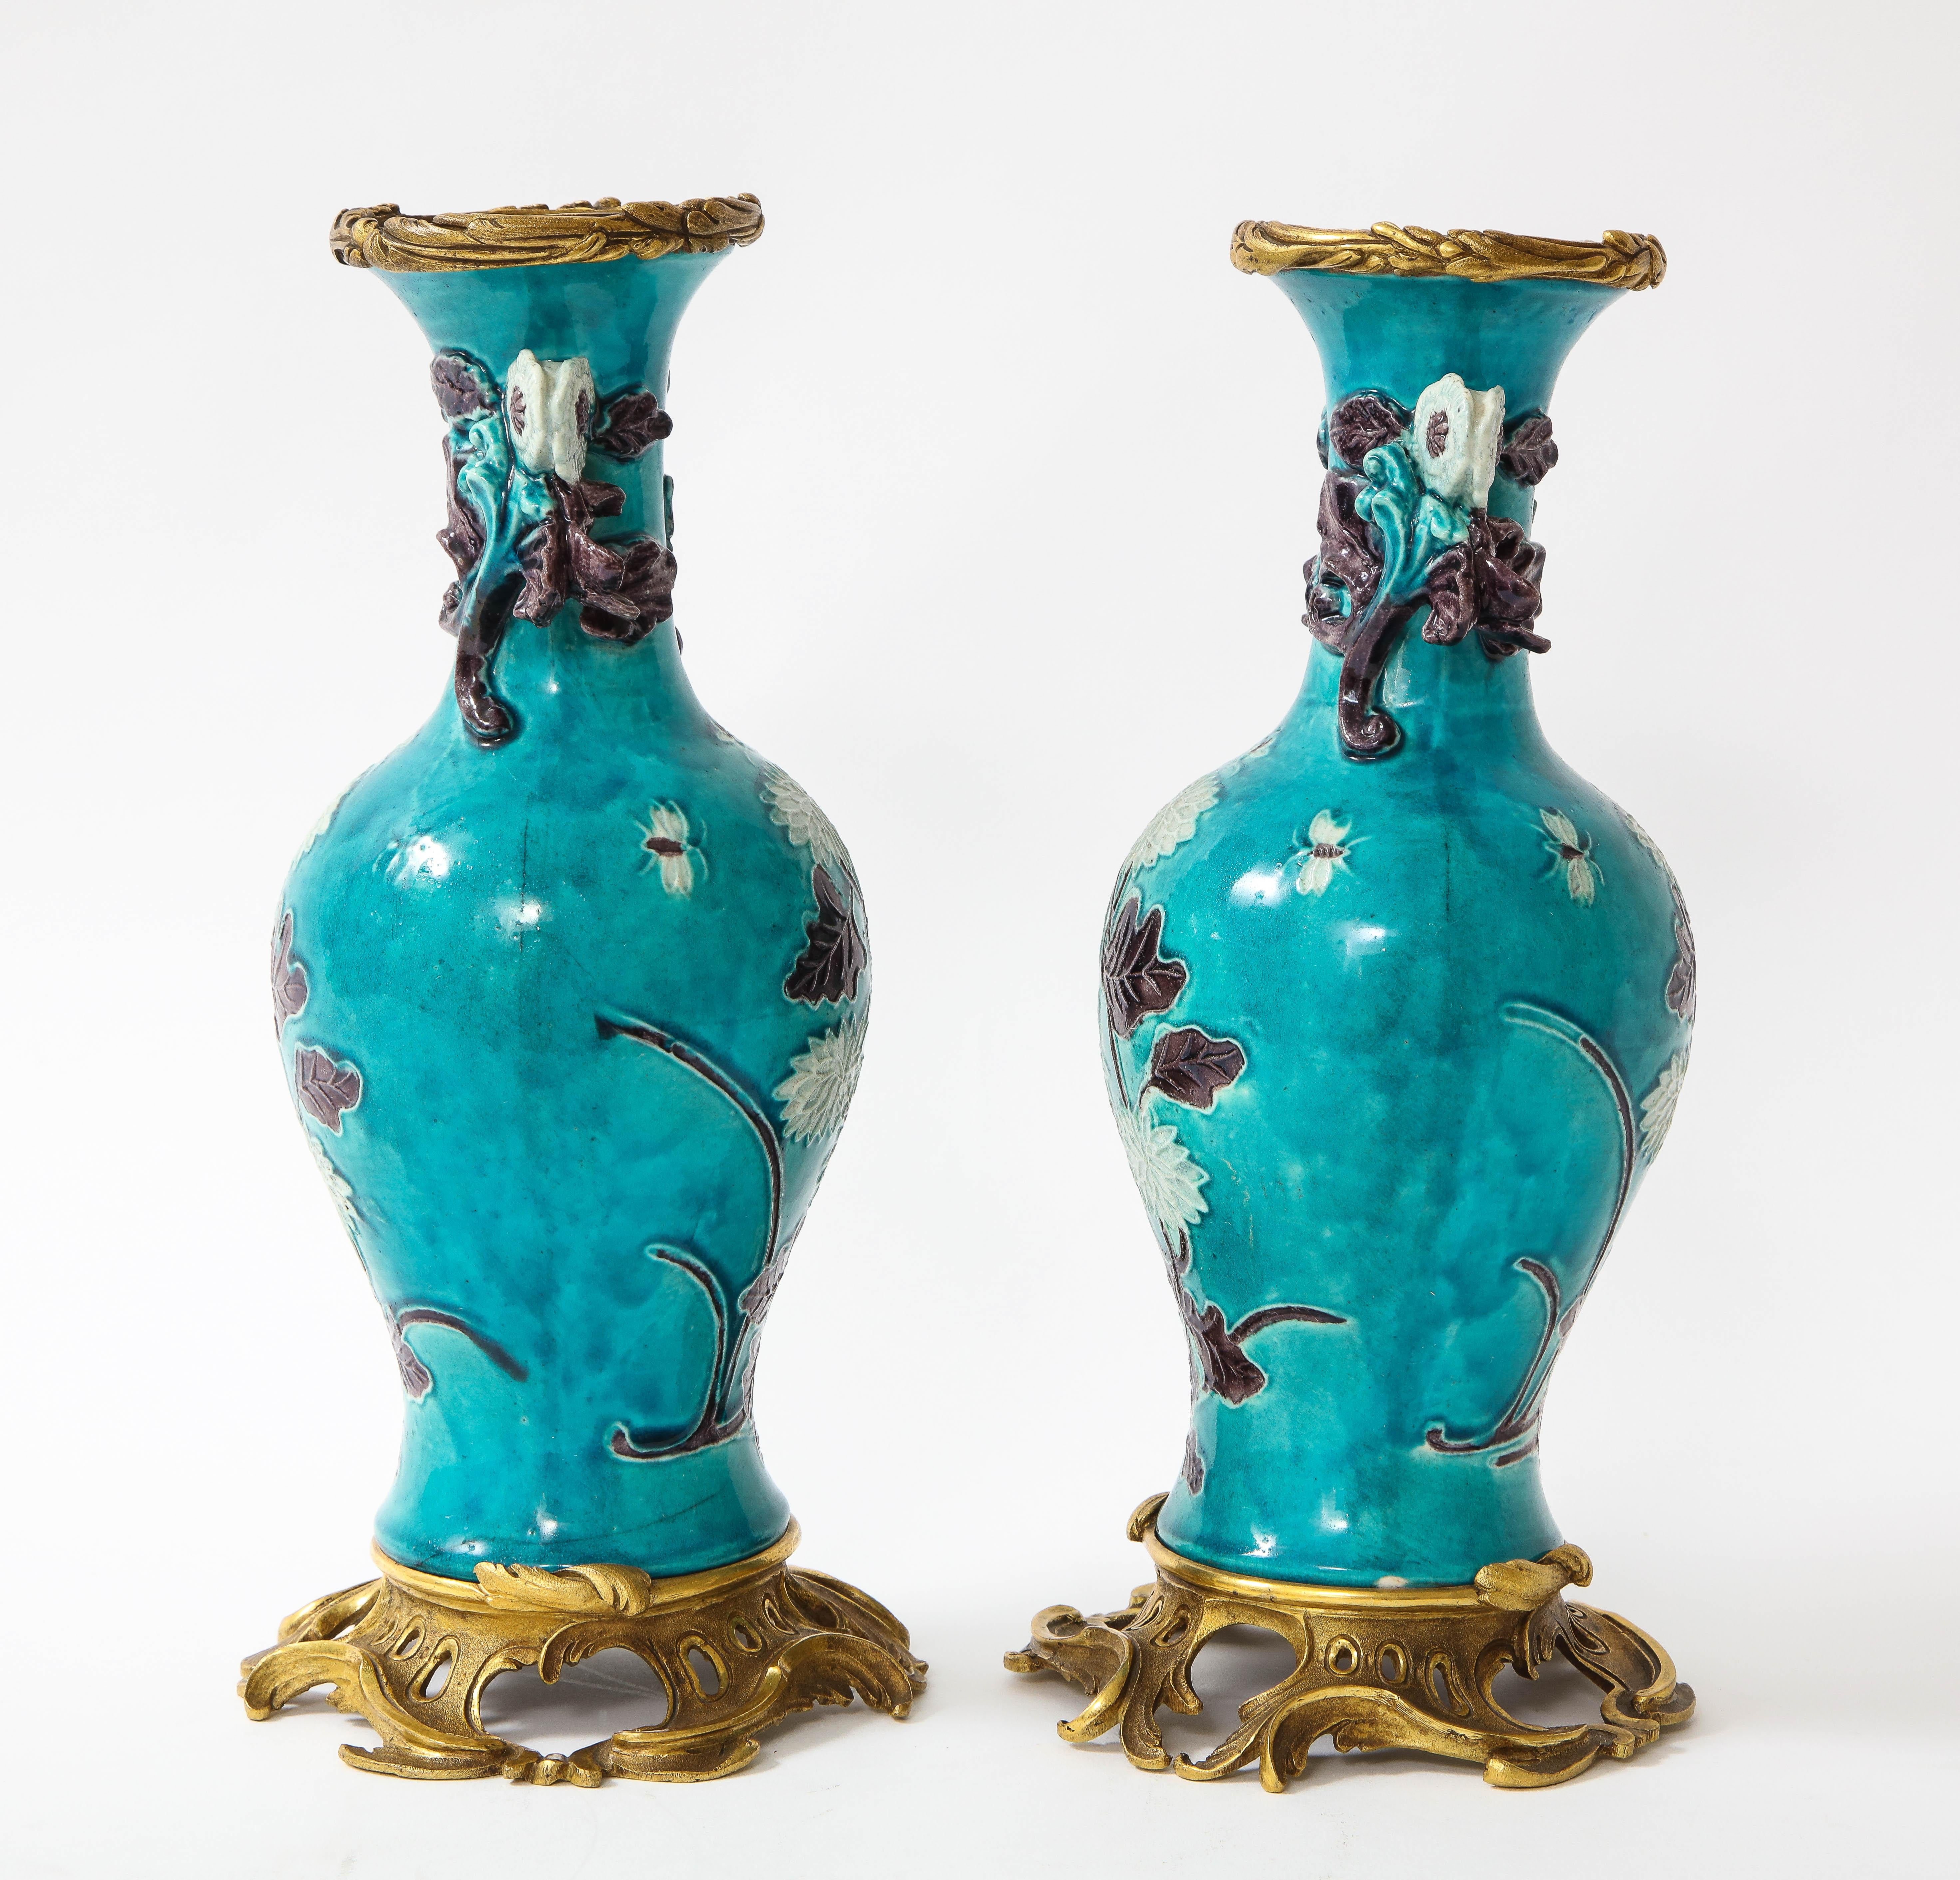 Pair of 18th Century Chinese Porcelain Vases with French Doré Bronze Mounts For Sale 1